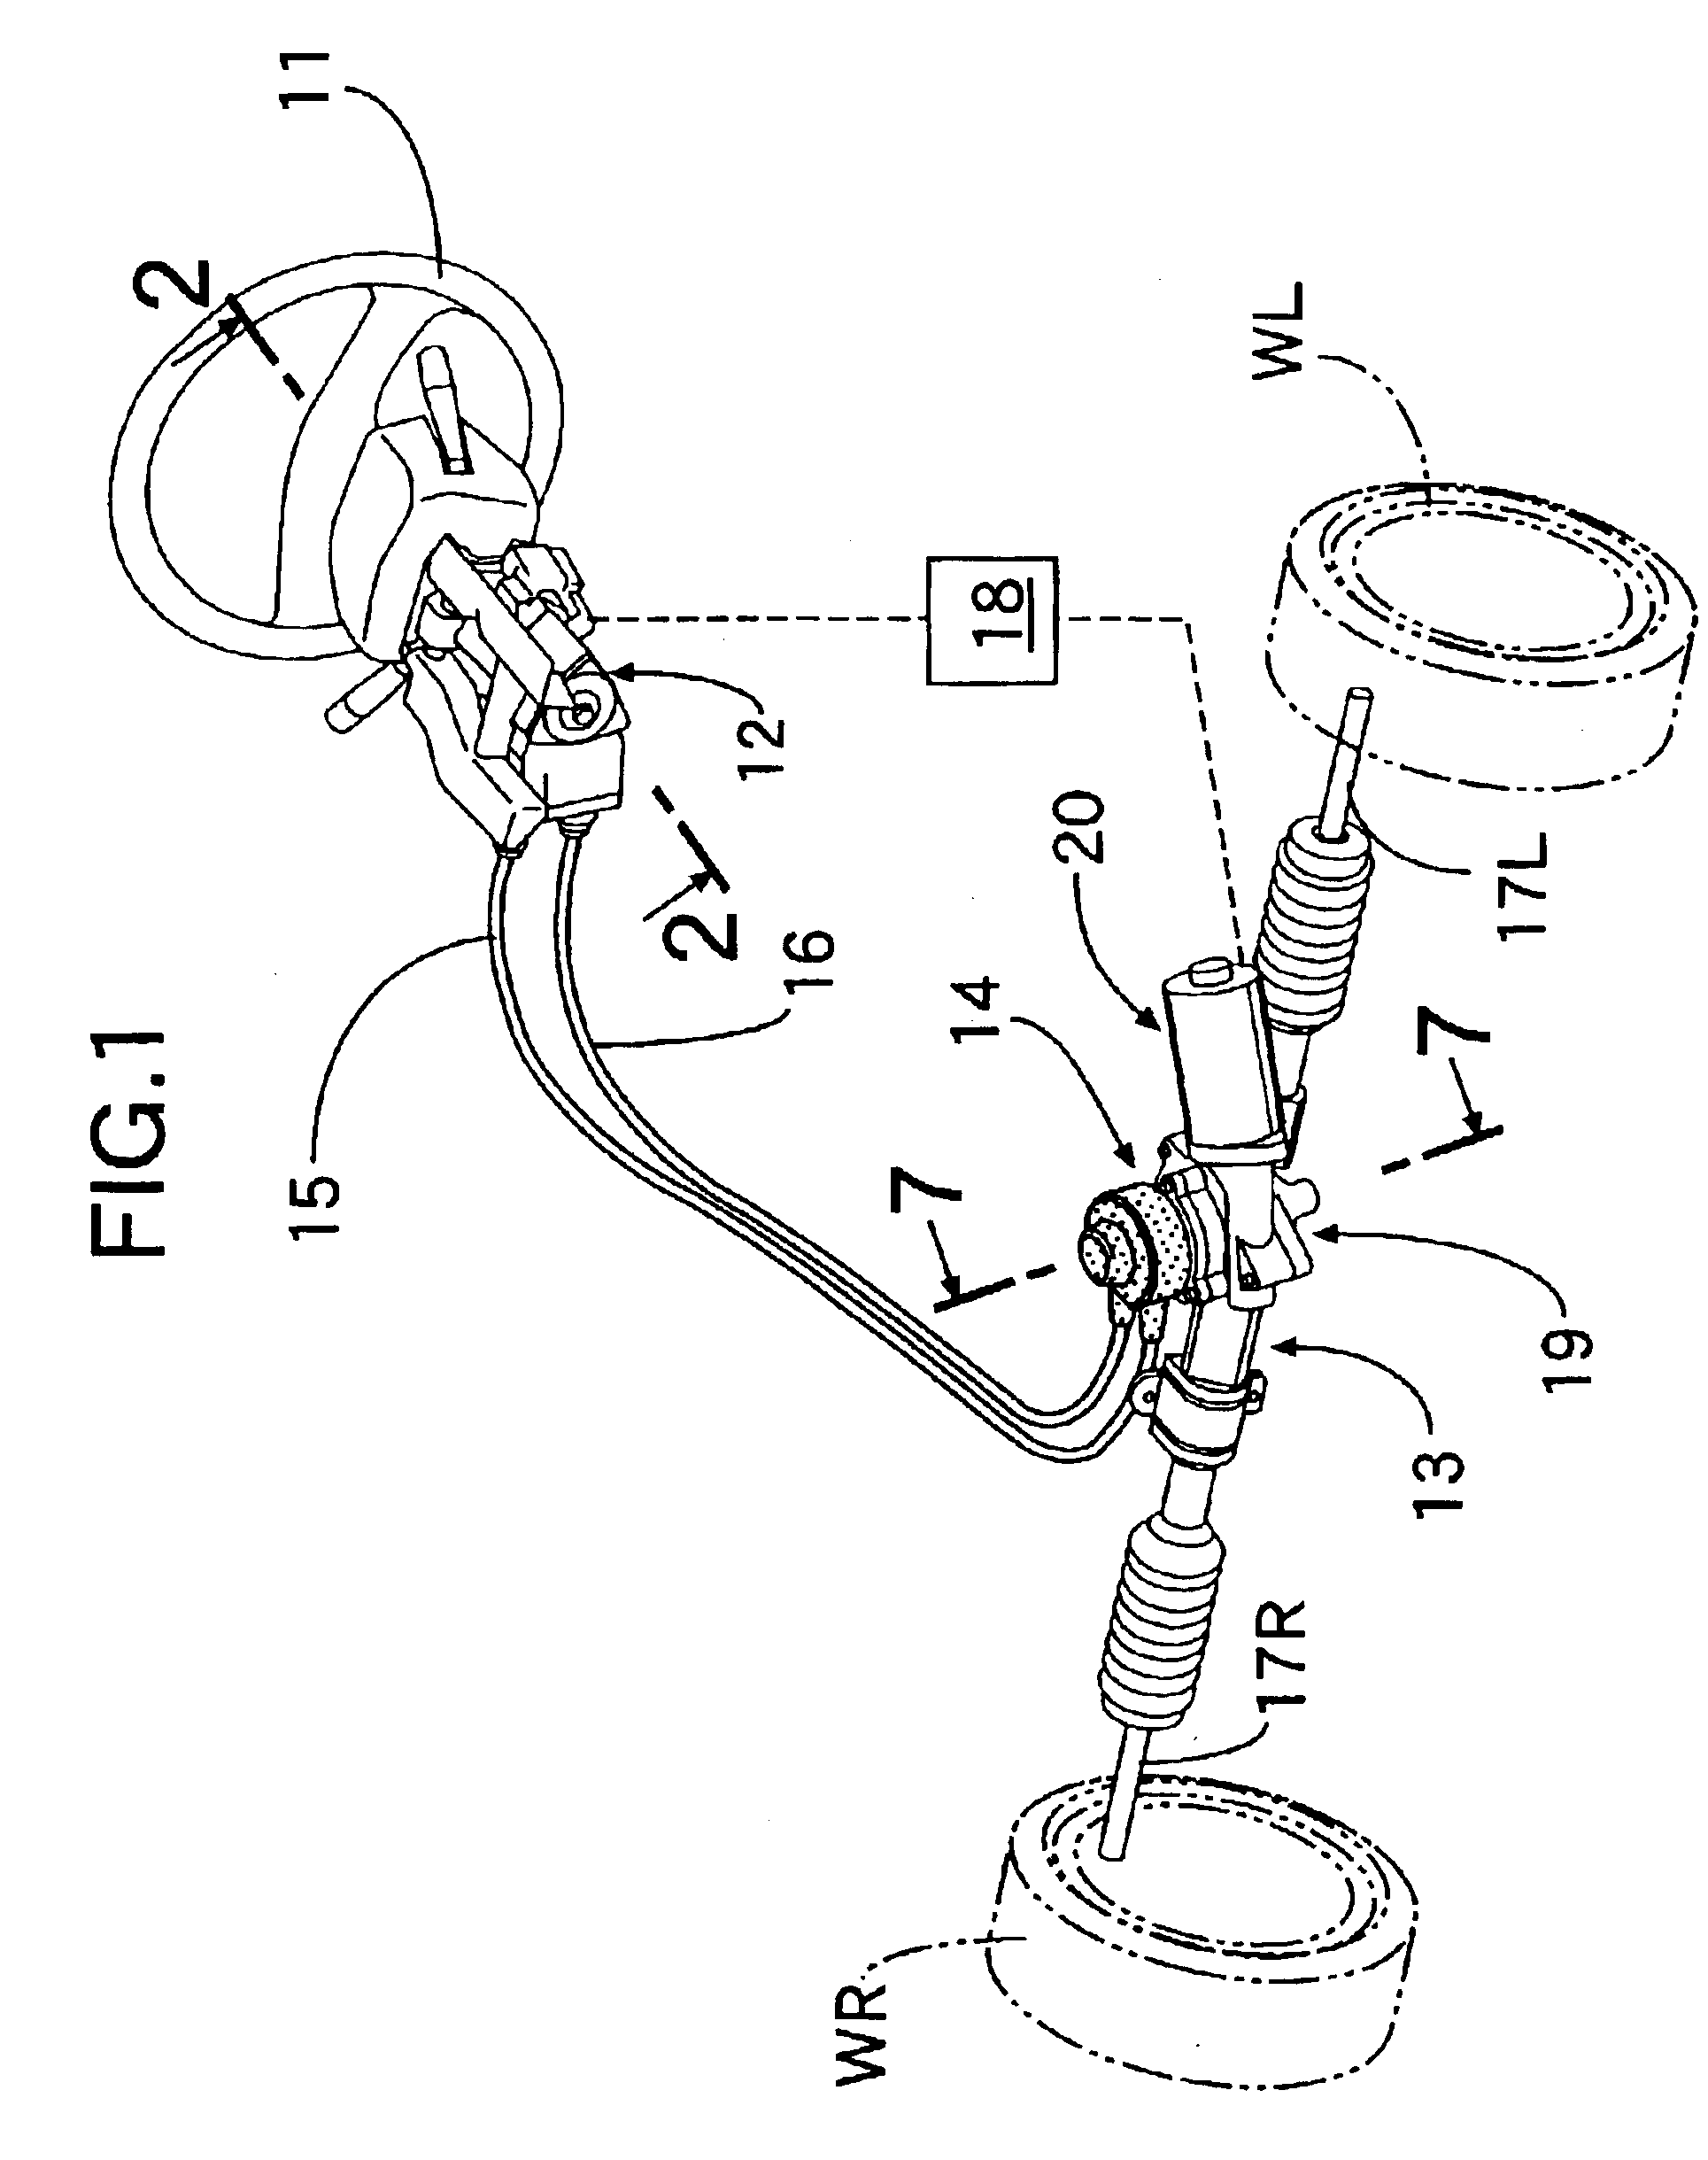 Cable-type steering device with variable steering gear ratio